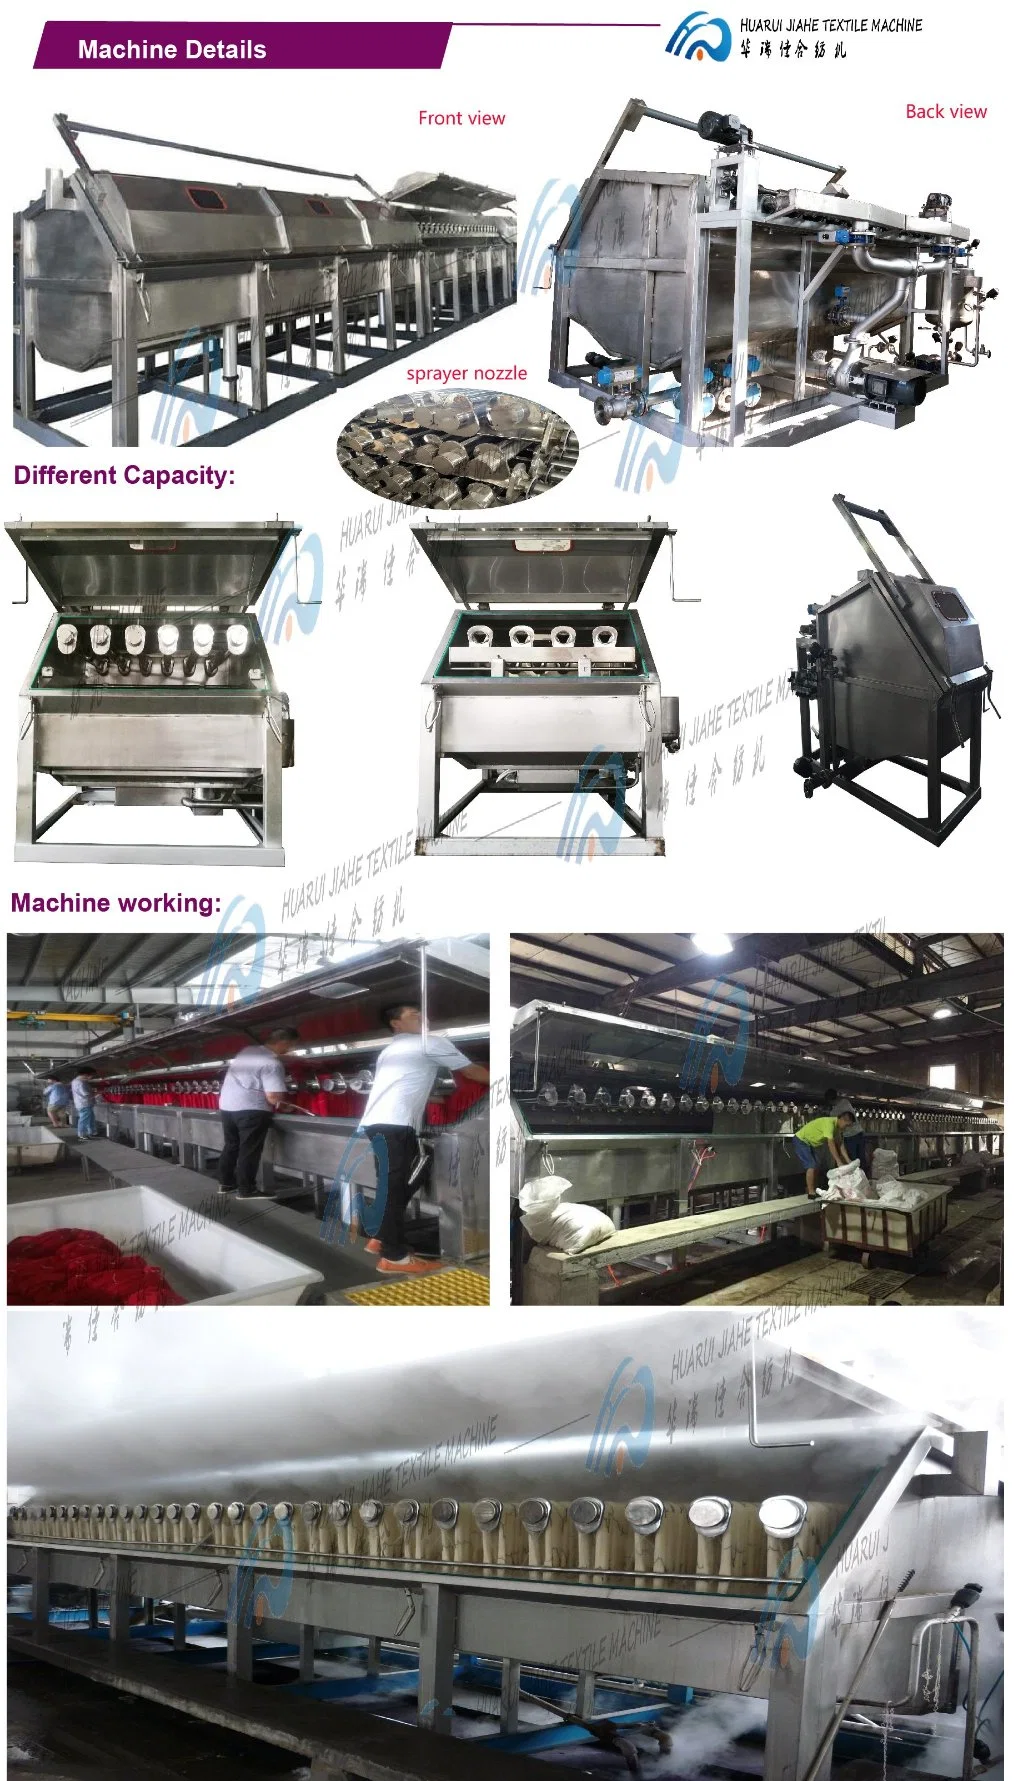 Ultra Low Energy Consumption Design Atmospheric Automatic Spray Yarn Dyeing Machine Factory Direct Supply of Yarn Dyeing Machinery